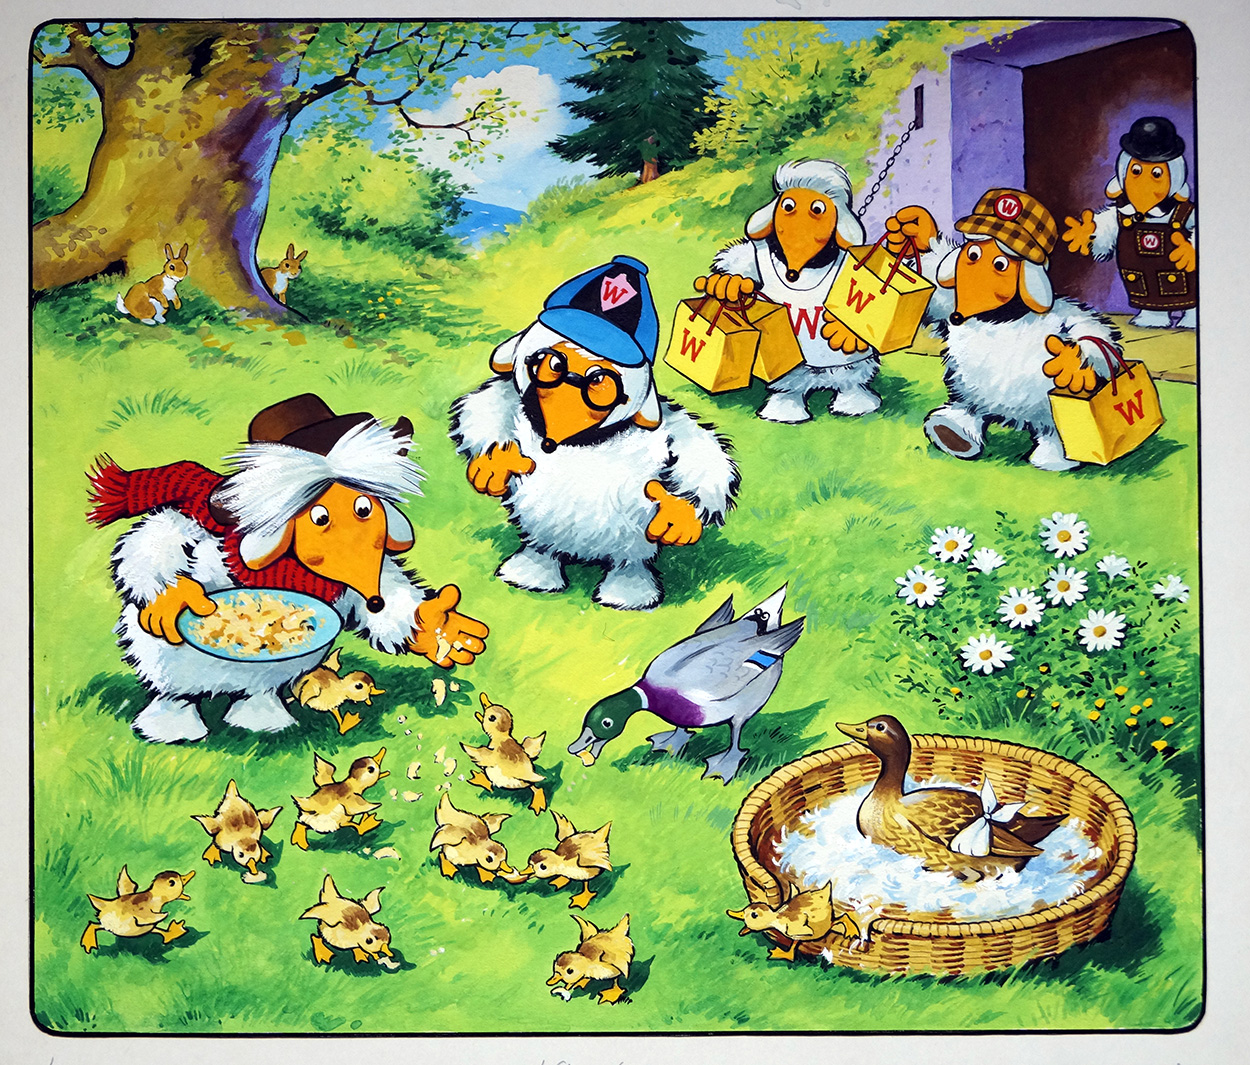 The Wombles: Ducks Go A-Dabbling (TWO pages) (Originals) art by The Wombles (Blasco) Art at The Illustration Art Gallery